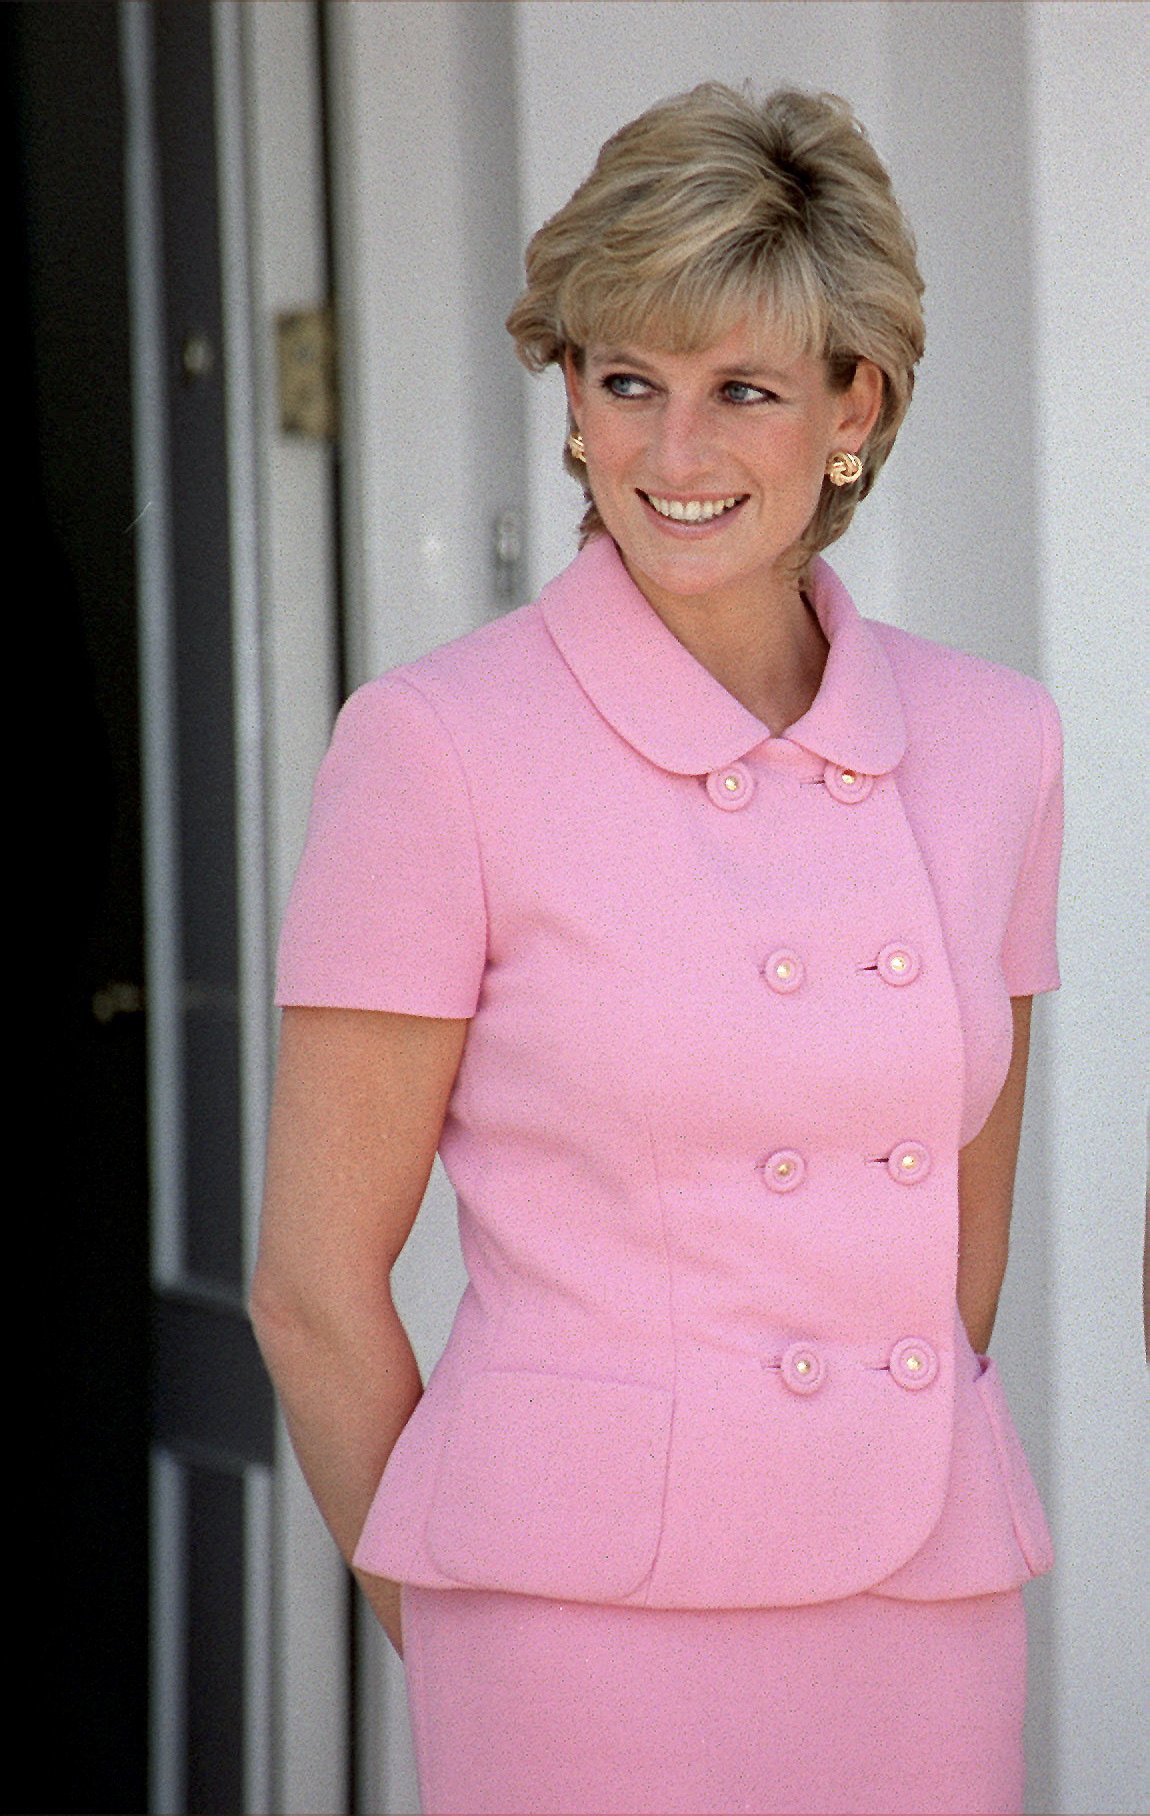 Pictured: Late royal, Princess Diana smiles, dressed in a matching pink outfit in Argentina | Photo: Getty Images